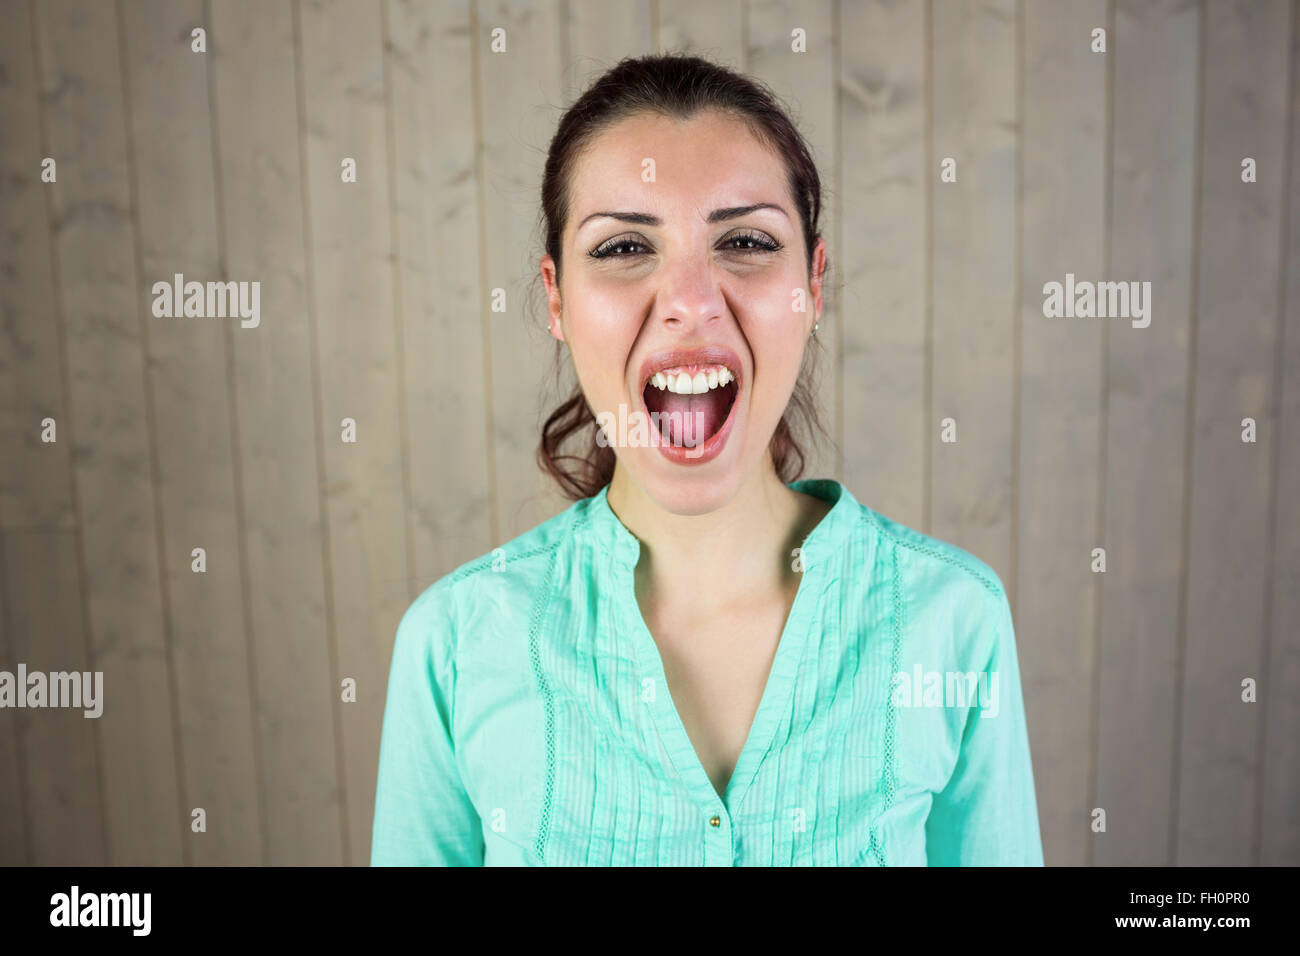 Portrait of screaming woman suffering from headache Stock Photo